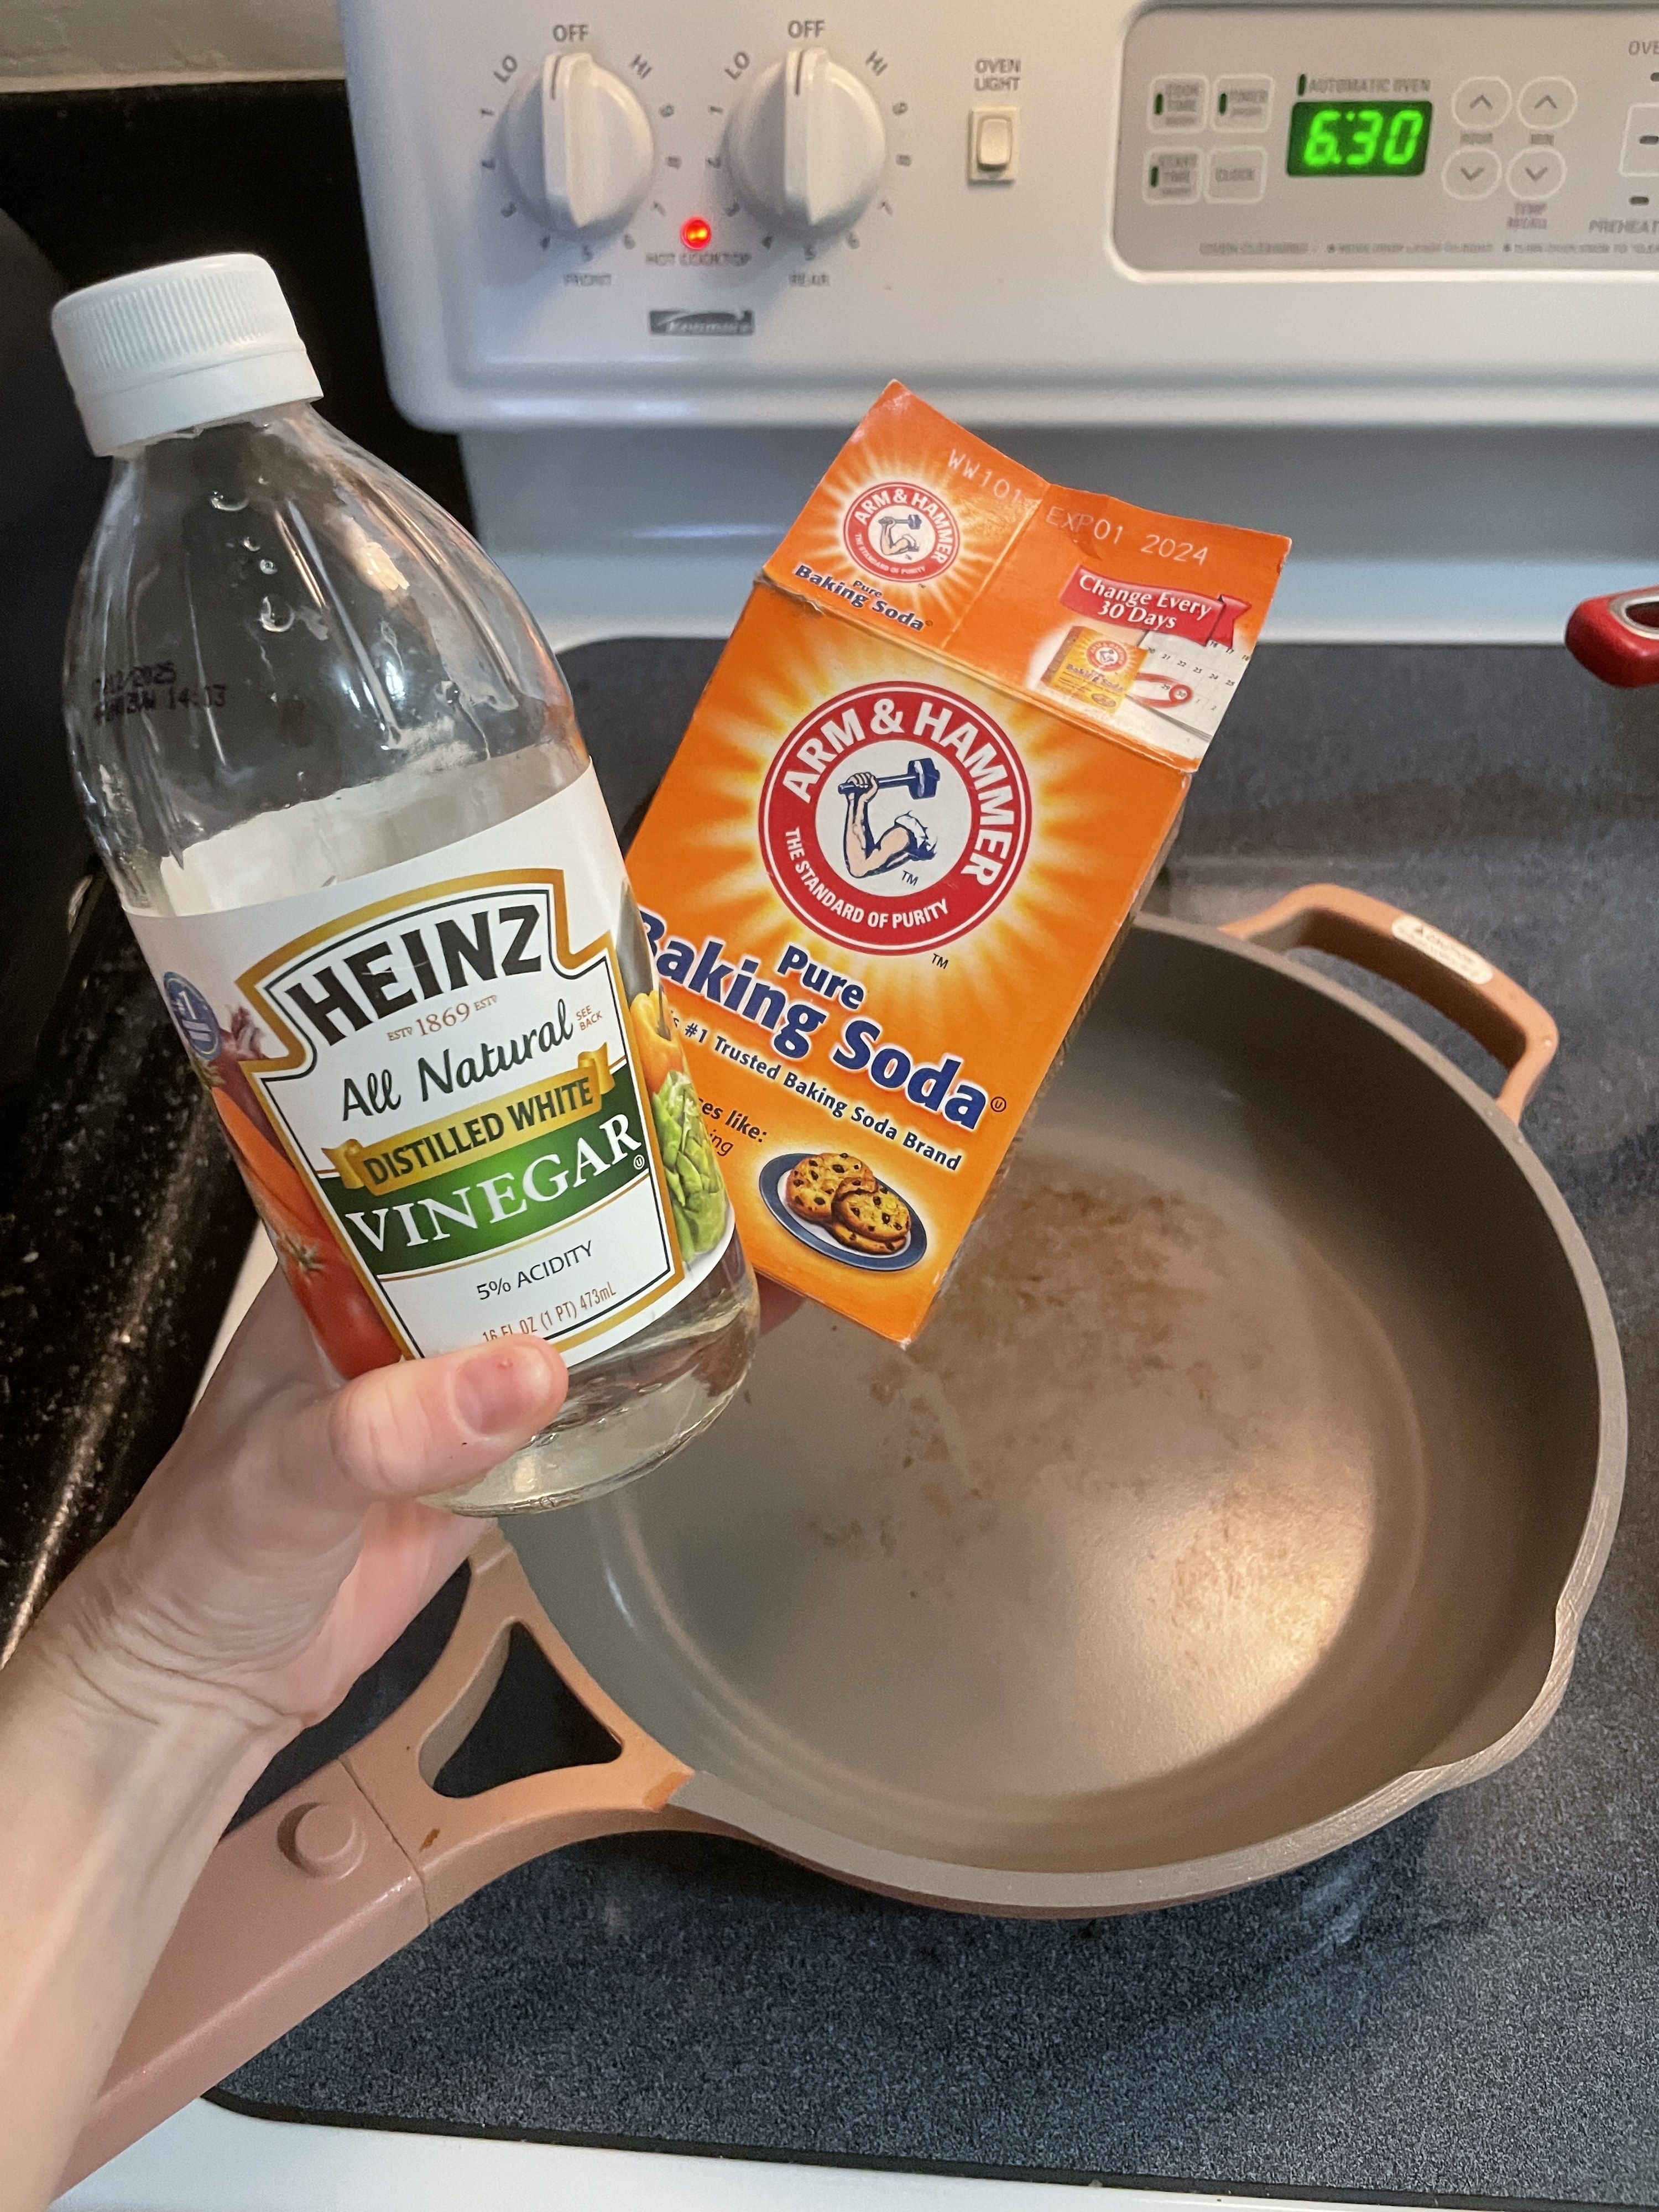 A bottle of white vinegar and a box of baking soda held above the pan on the stove top